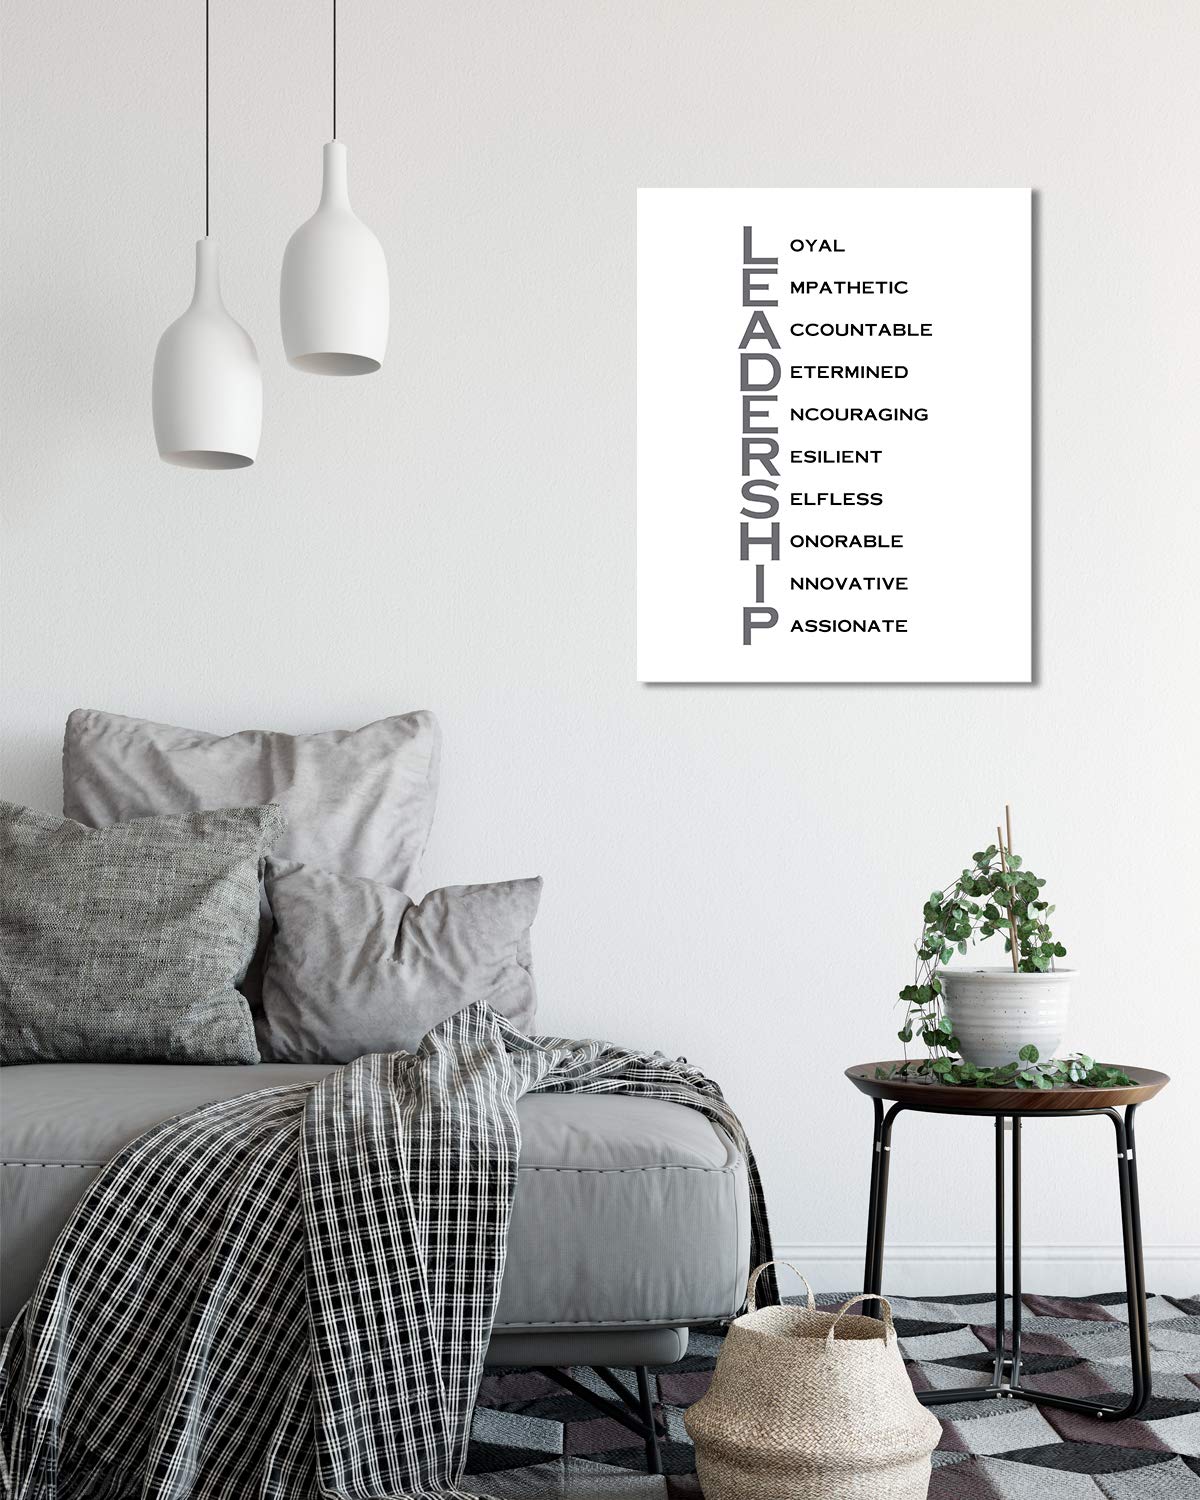 Leadership Acronym - Wall Decor Art Print with a white background